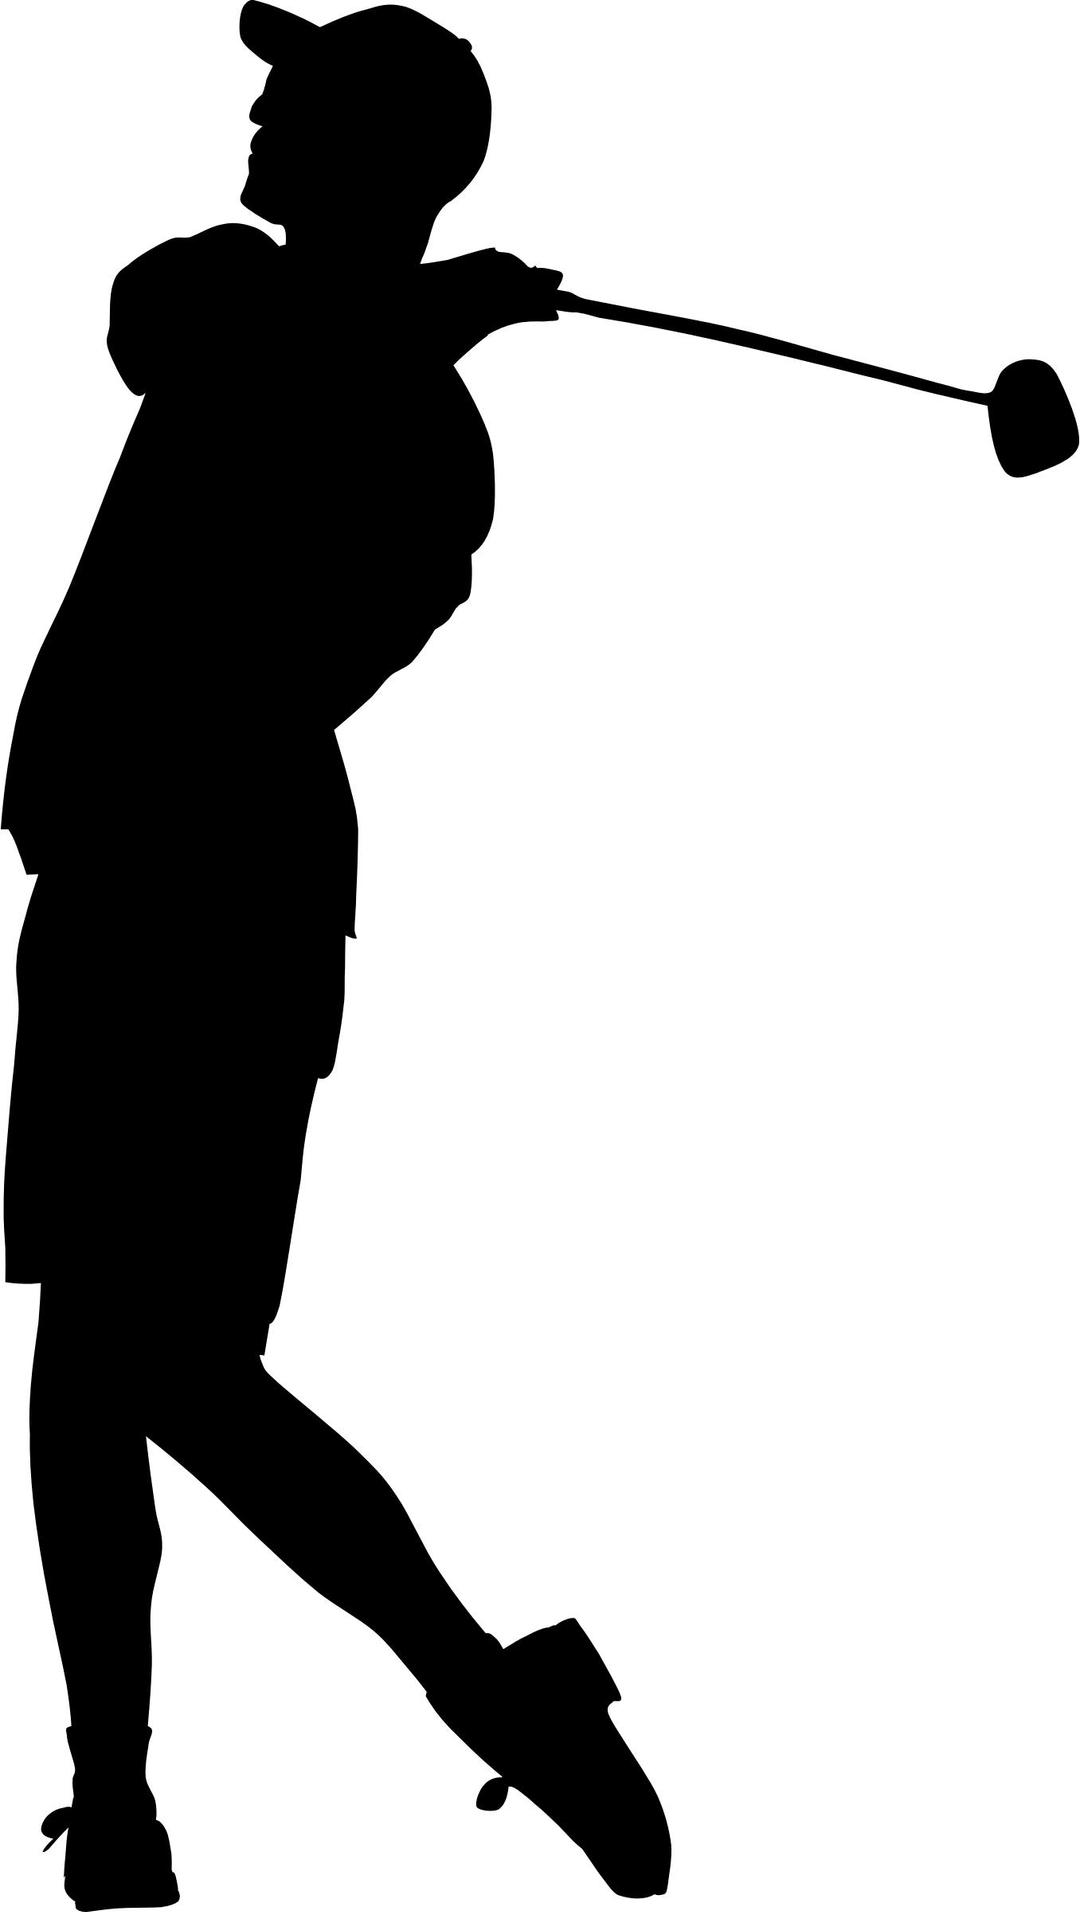 Golfer silhouette png transparent